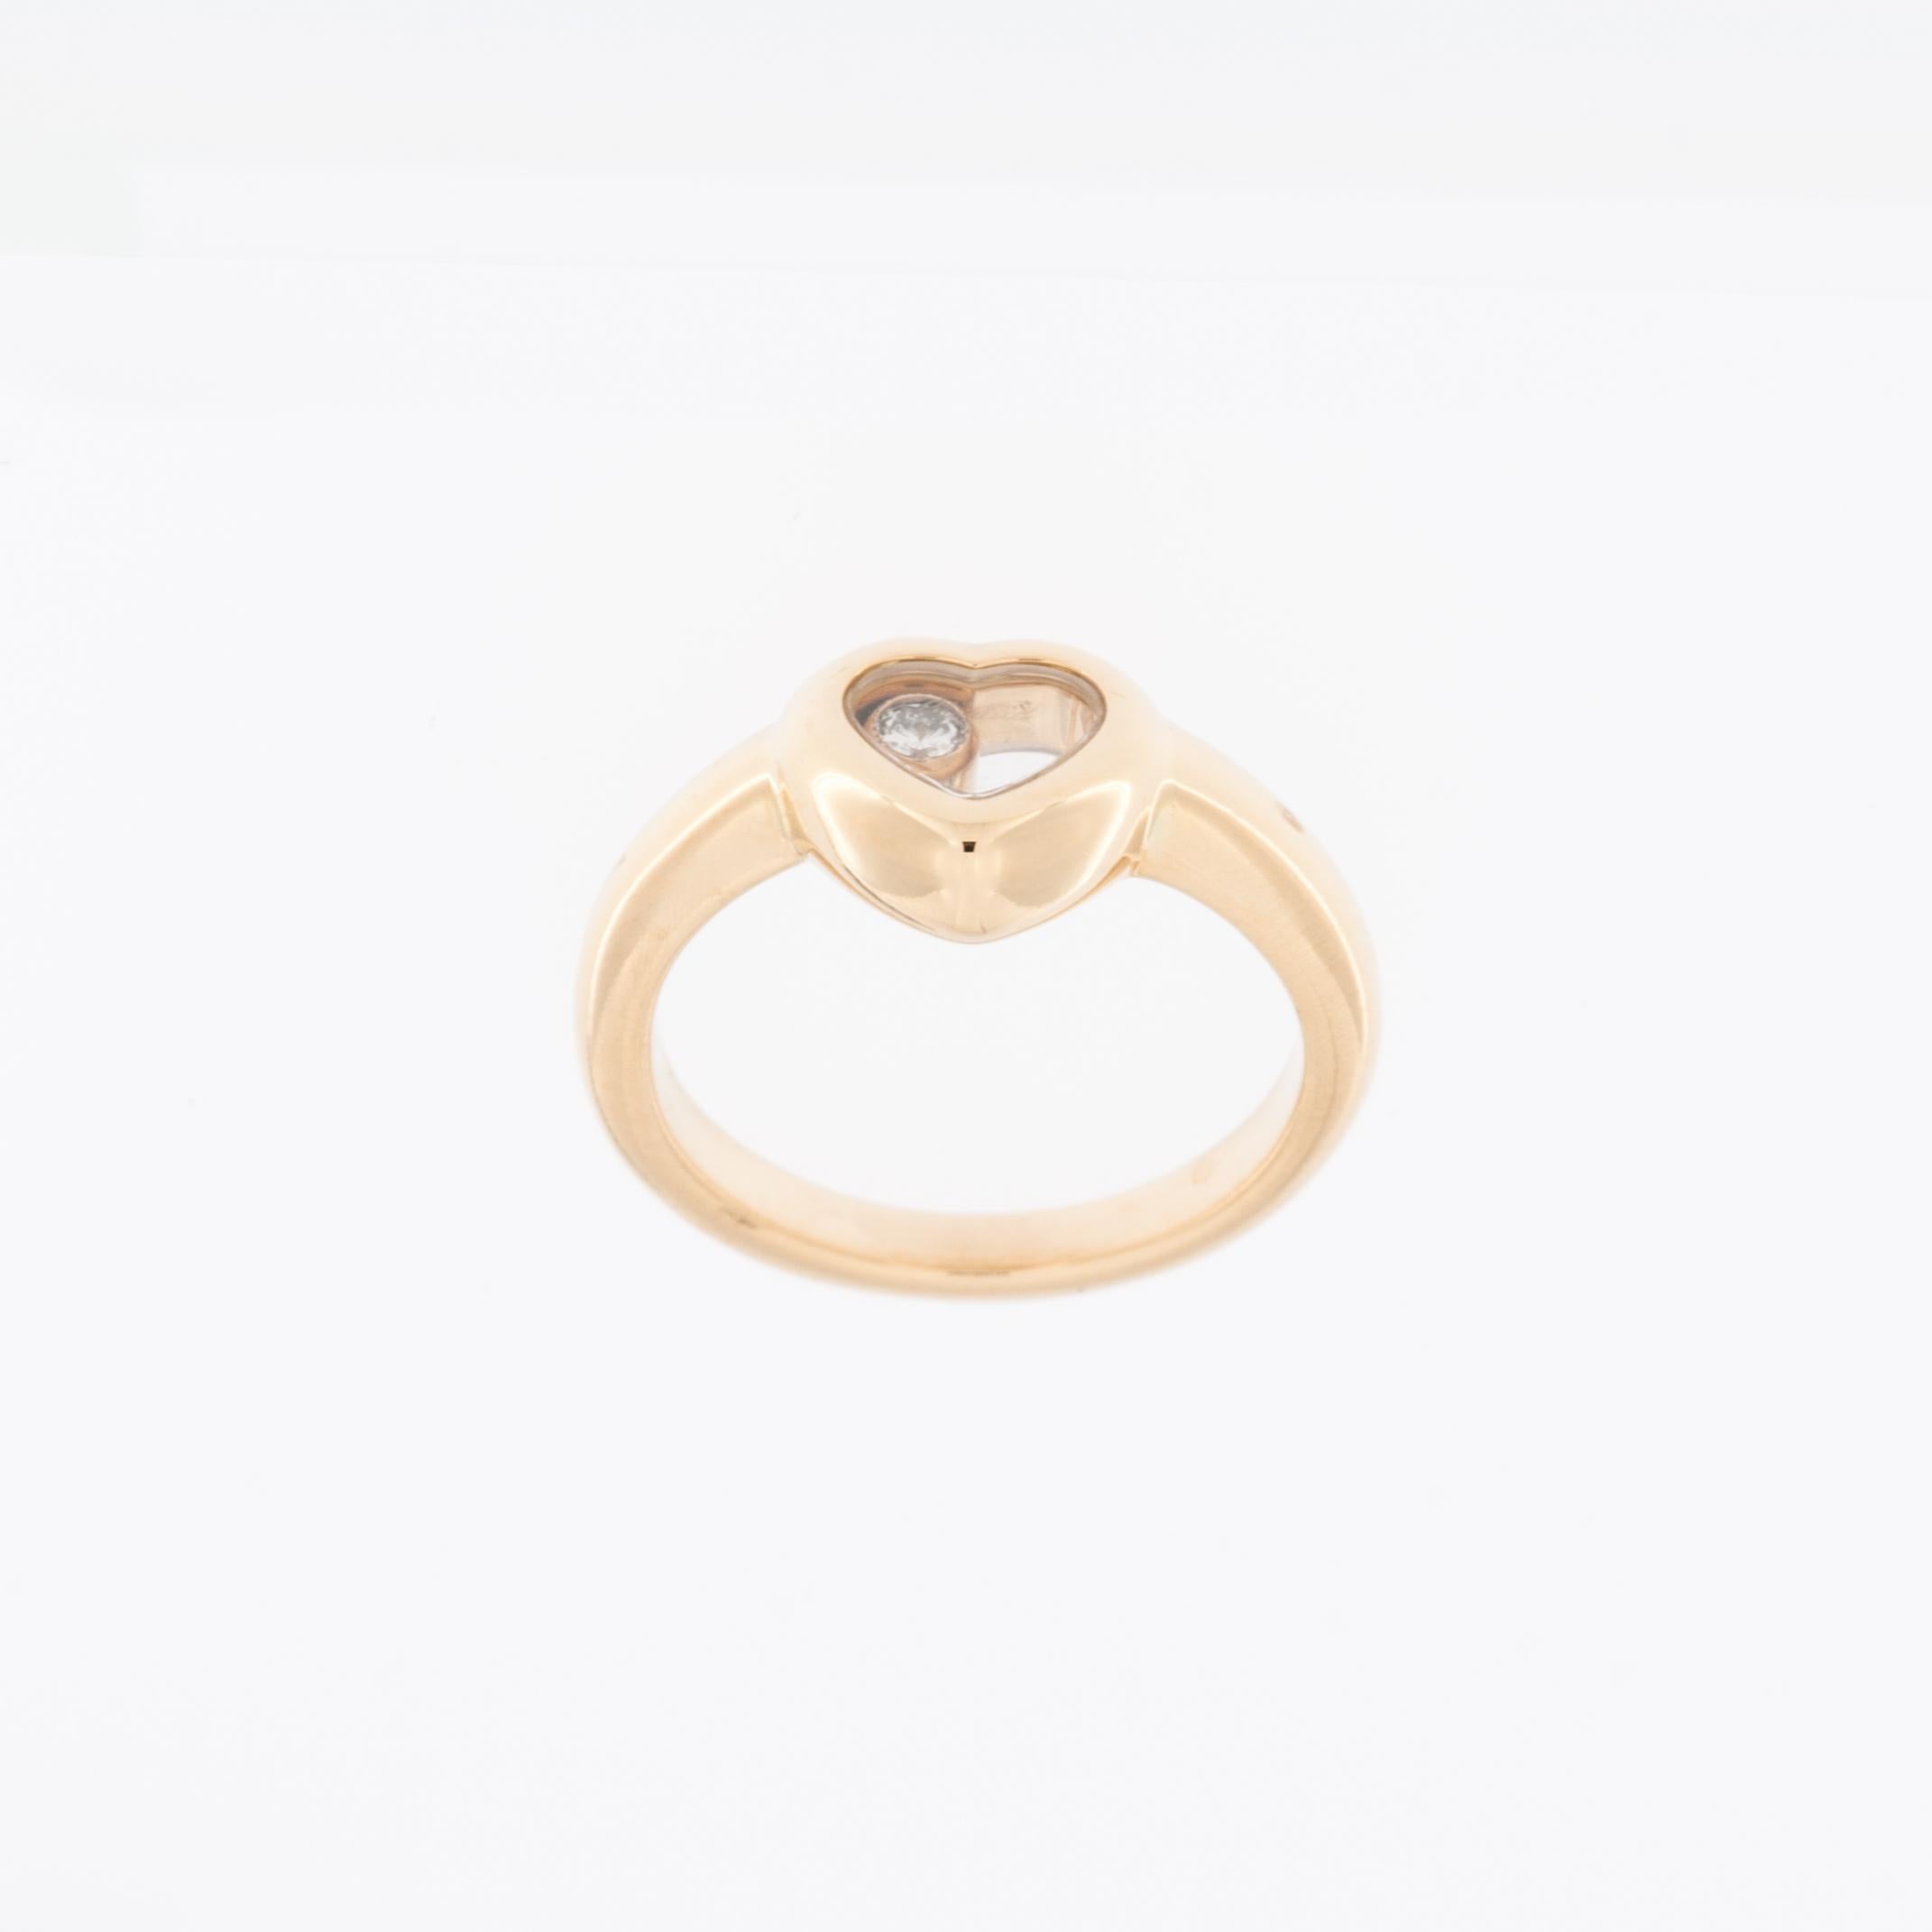 This Chopard Happy Diamond Heart Ring is a luxurious and iconic piece that seamlessly blends sophistication with a playful touch. 

Meticulously crafted from 18 karat yellow gold, the ring showcases a high level of purity and quality. The radiant